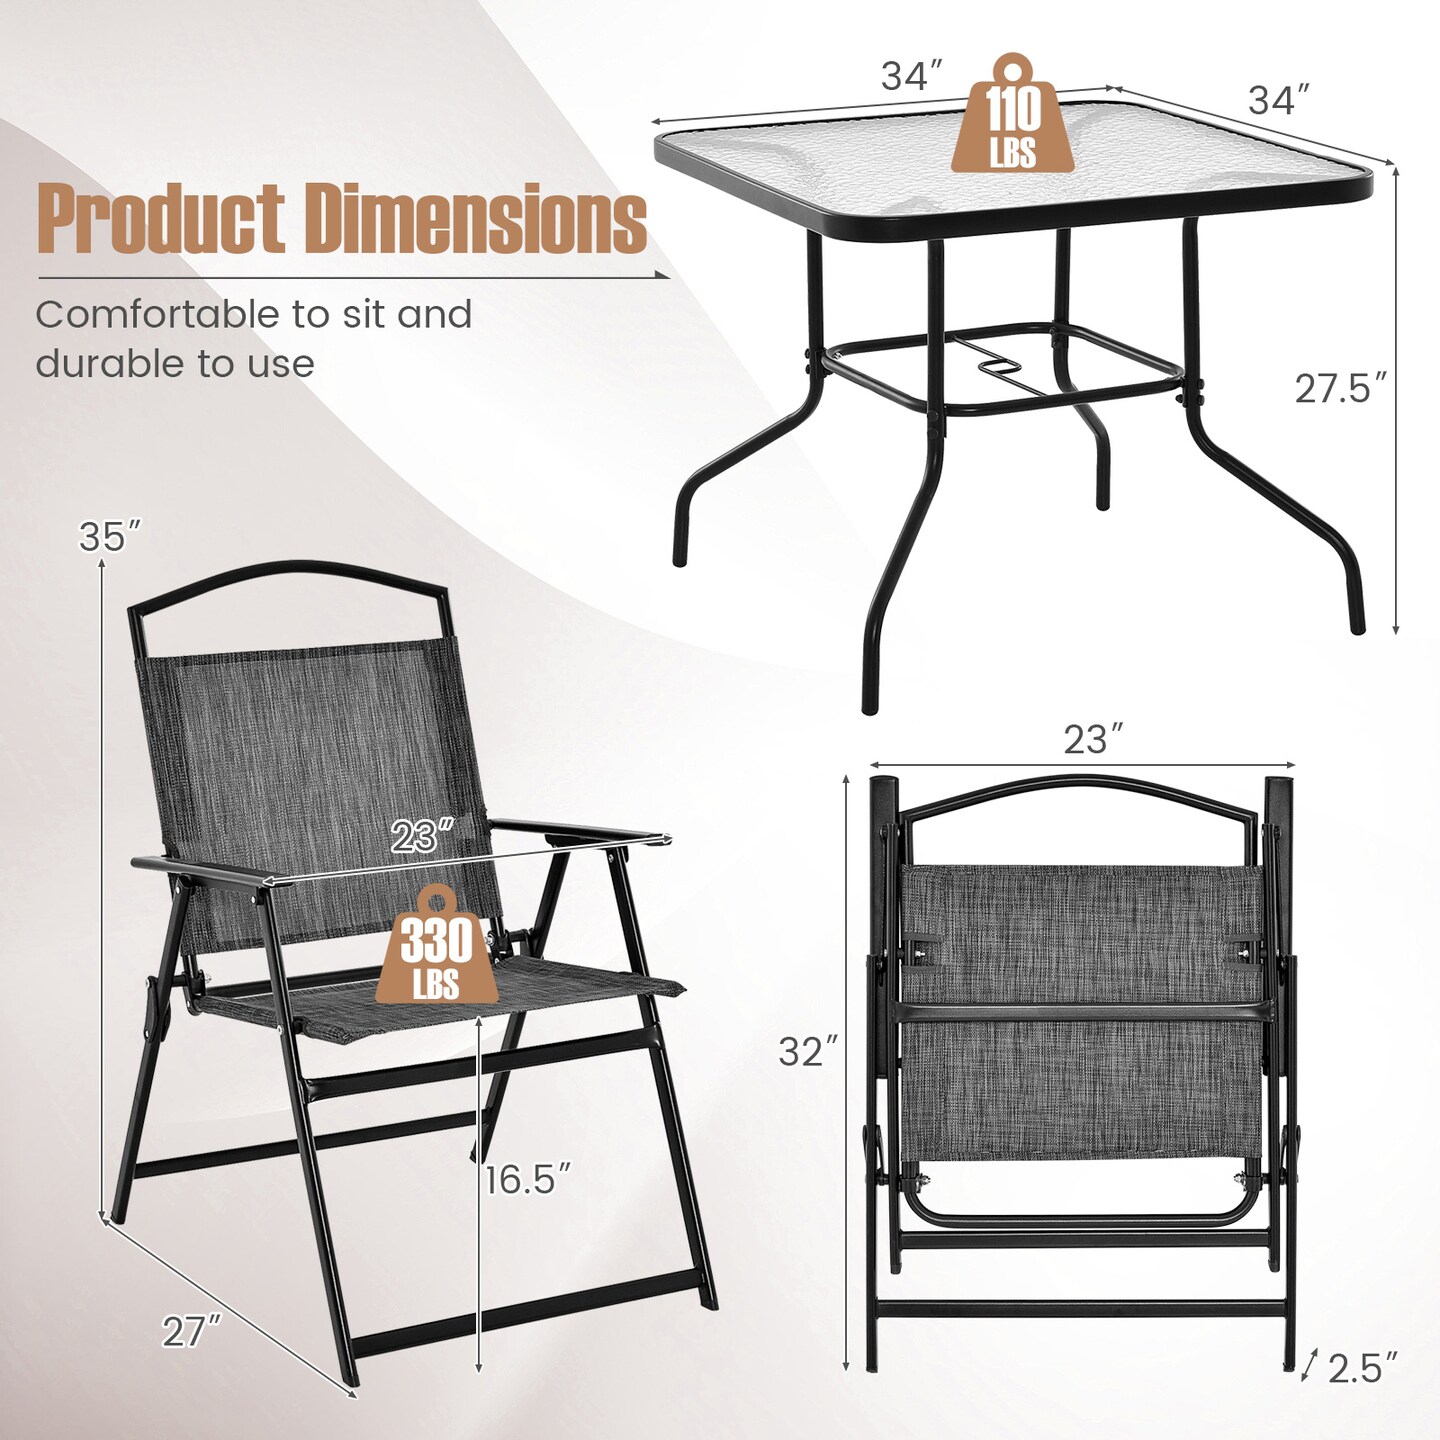 Patio Dining Set For 4 With Umbrella Hole-gray